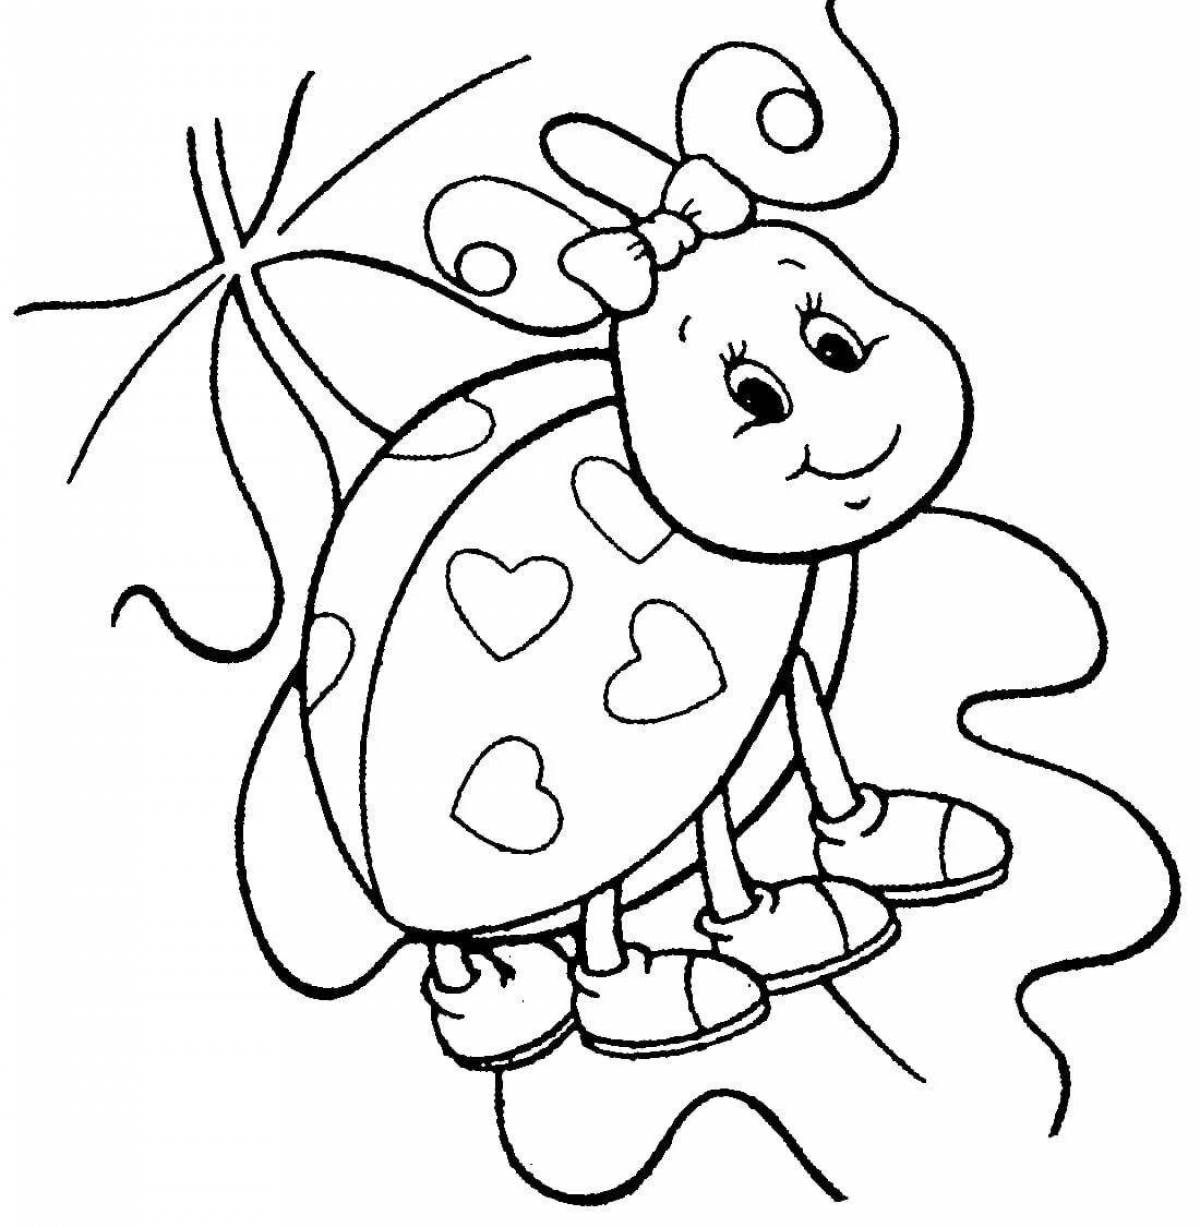 Fun insect coloring pages for 3-4 year olds